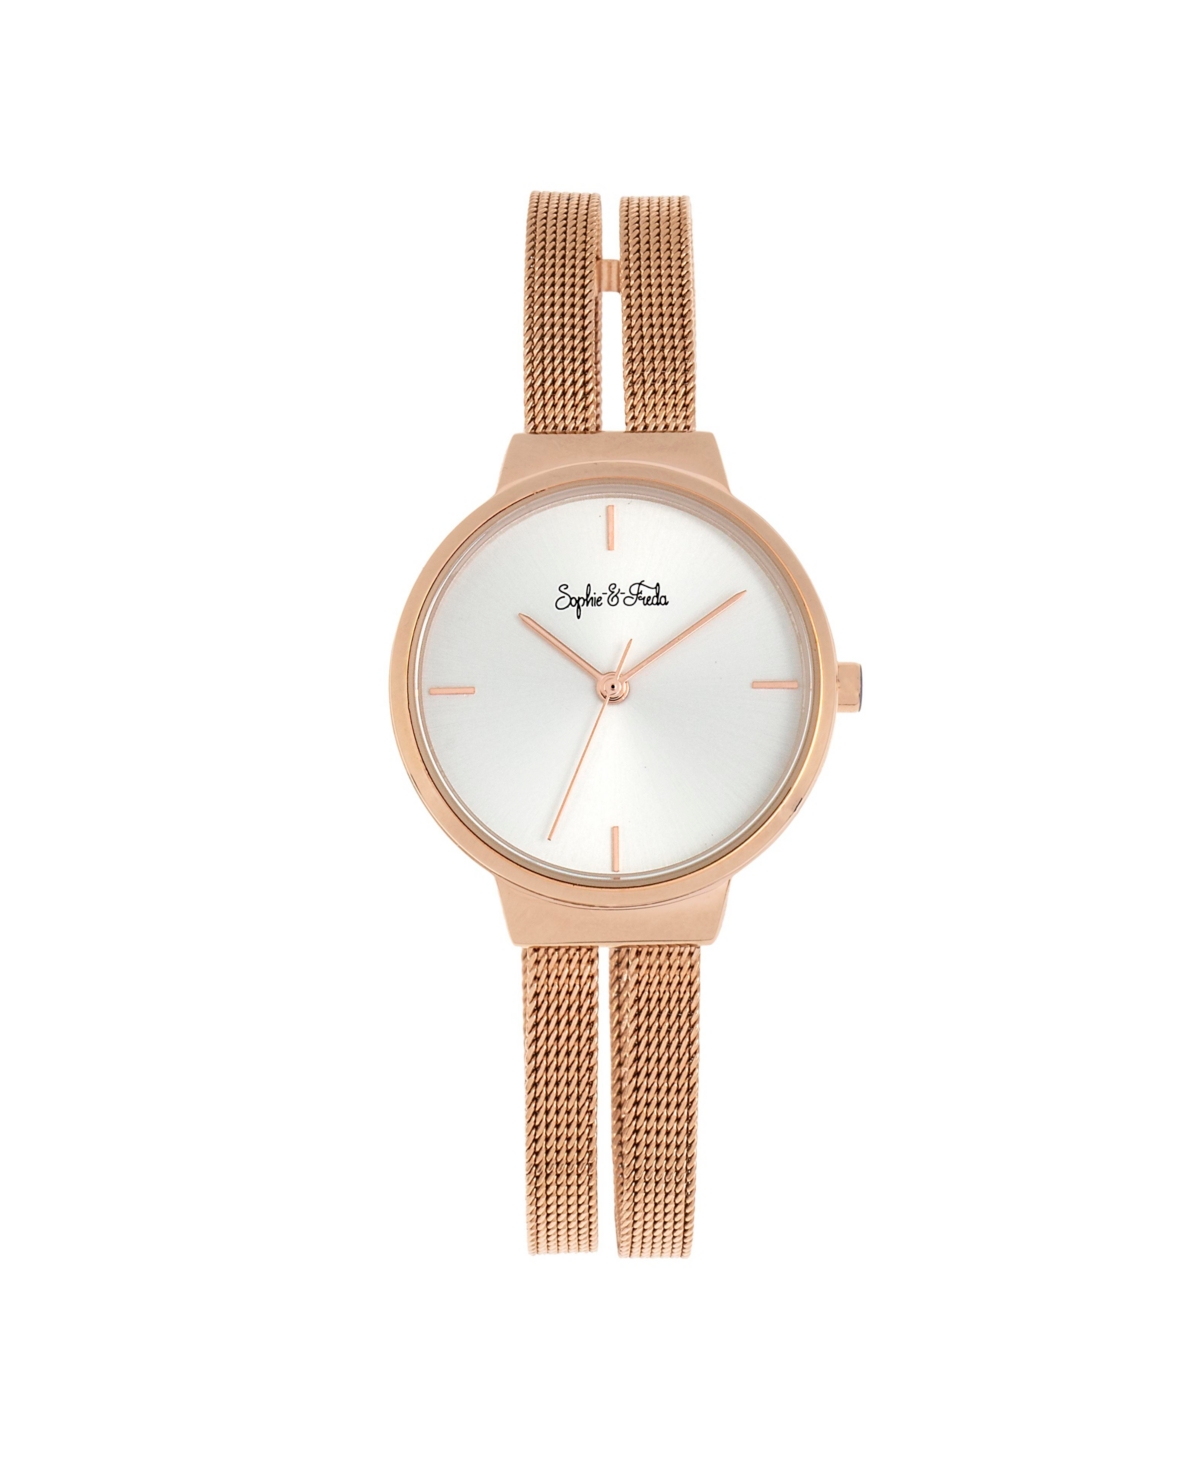 Women Sedona Stainless Steel Watch - Rose Gold, 30mm - Rose gold